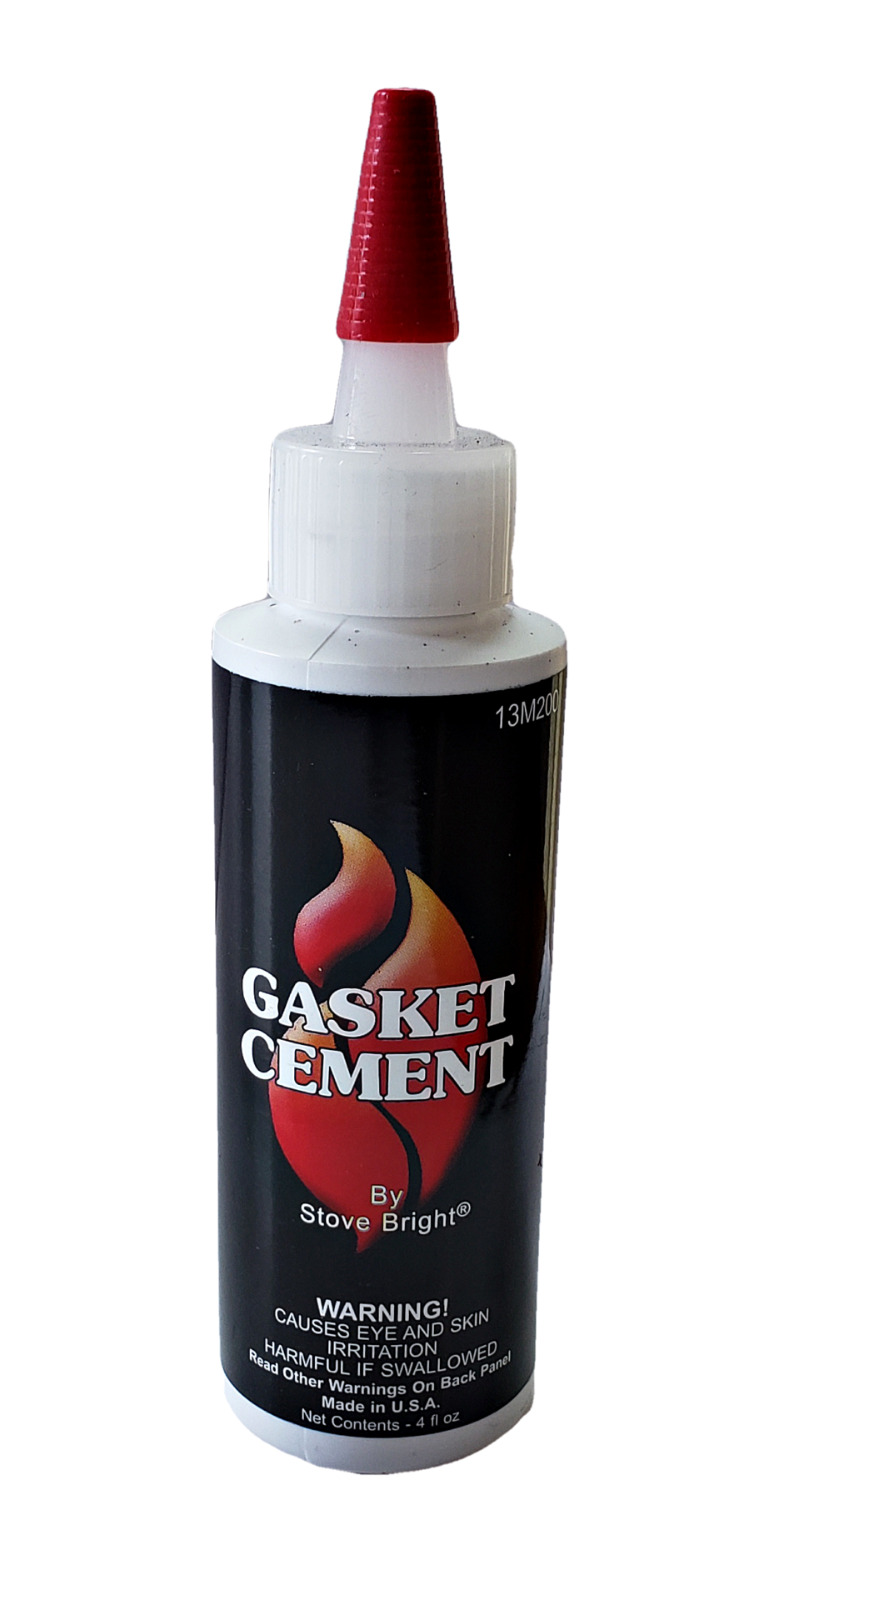 Stove Bright Gasket Glue Cement, 4oz, Fireplaces & Stoves, 13M200 - RATED #1